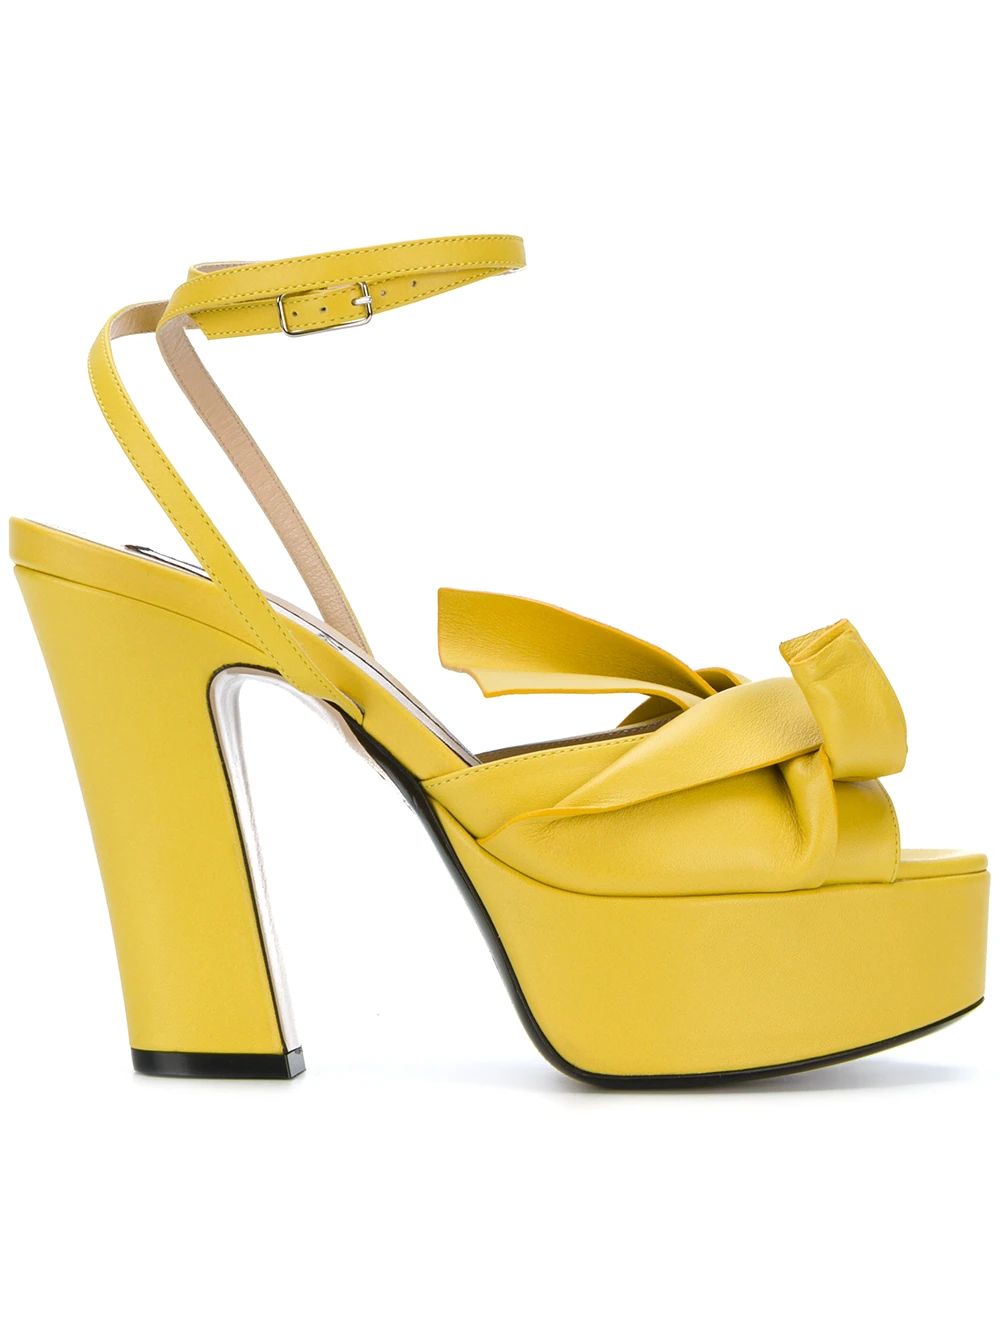 No21 abstract bow platform sandals - Yellow | FarFetch Global